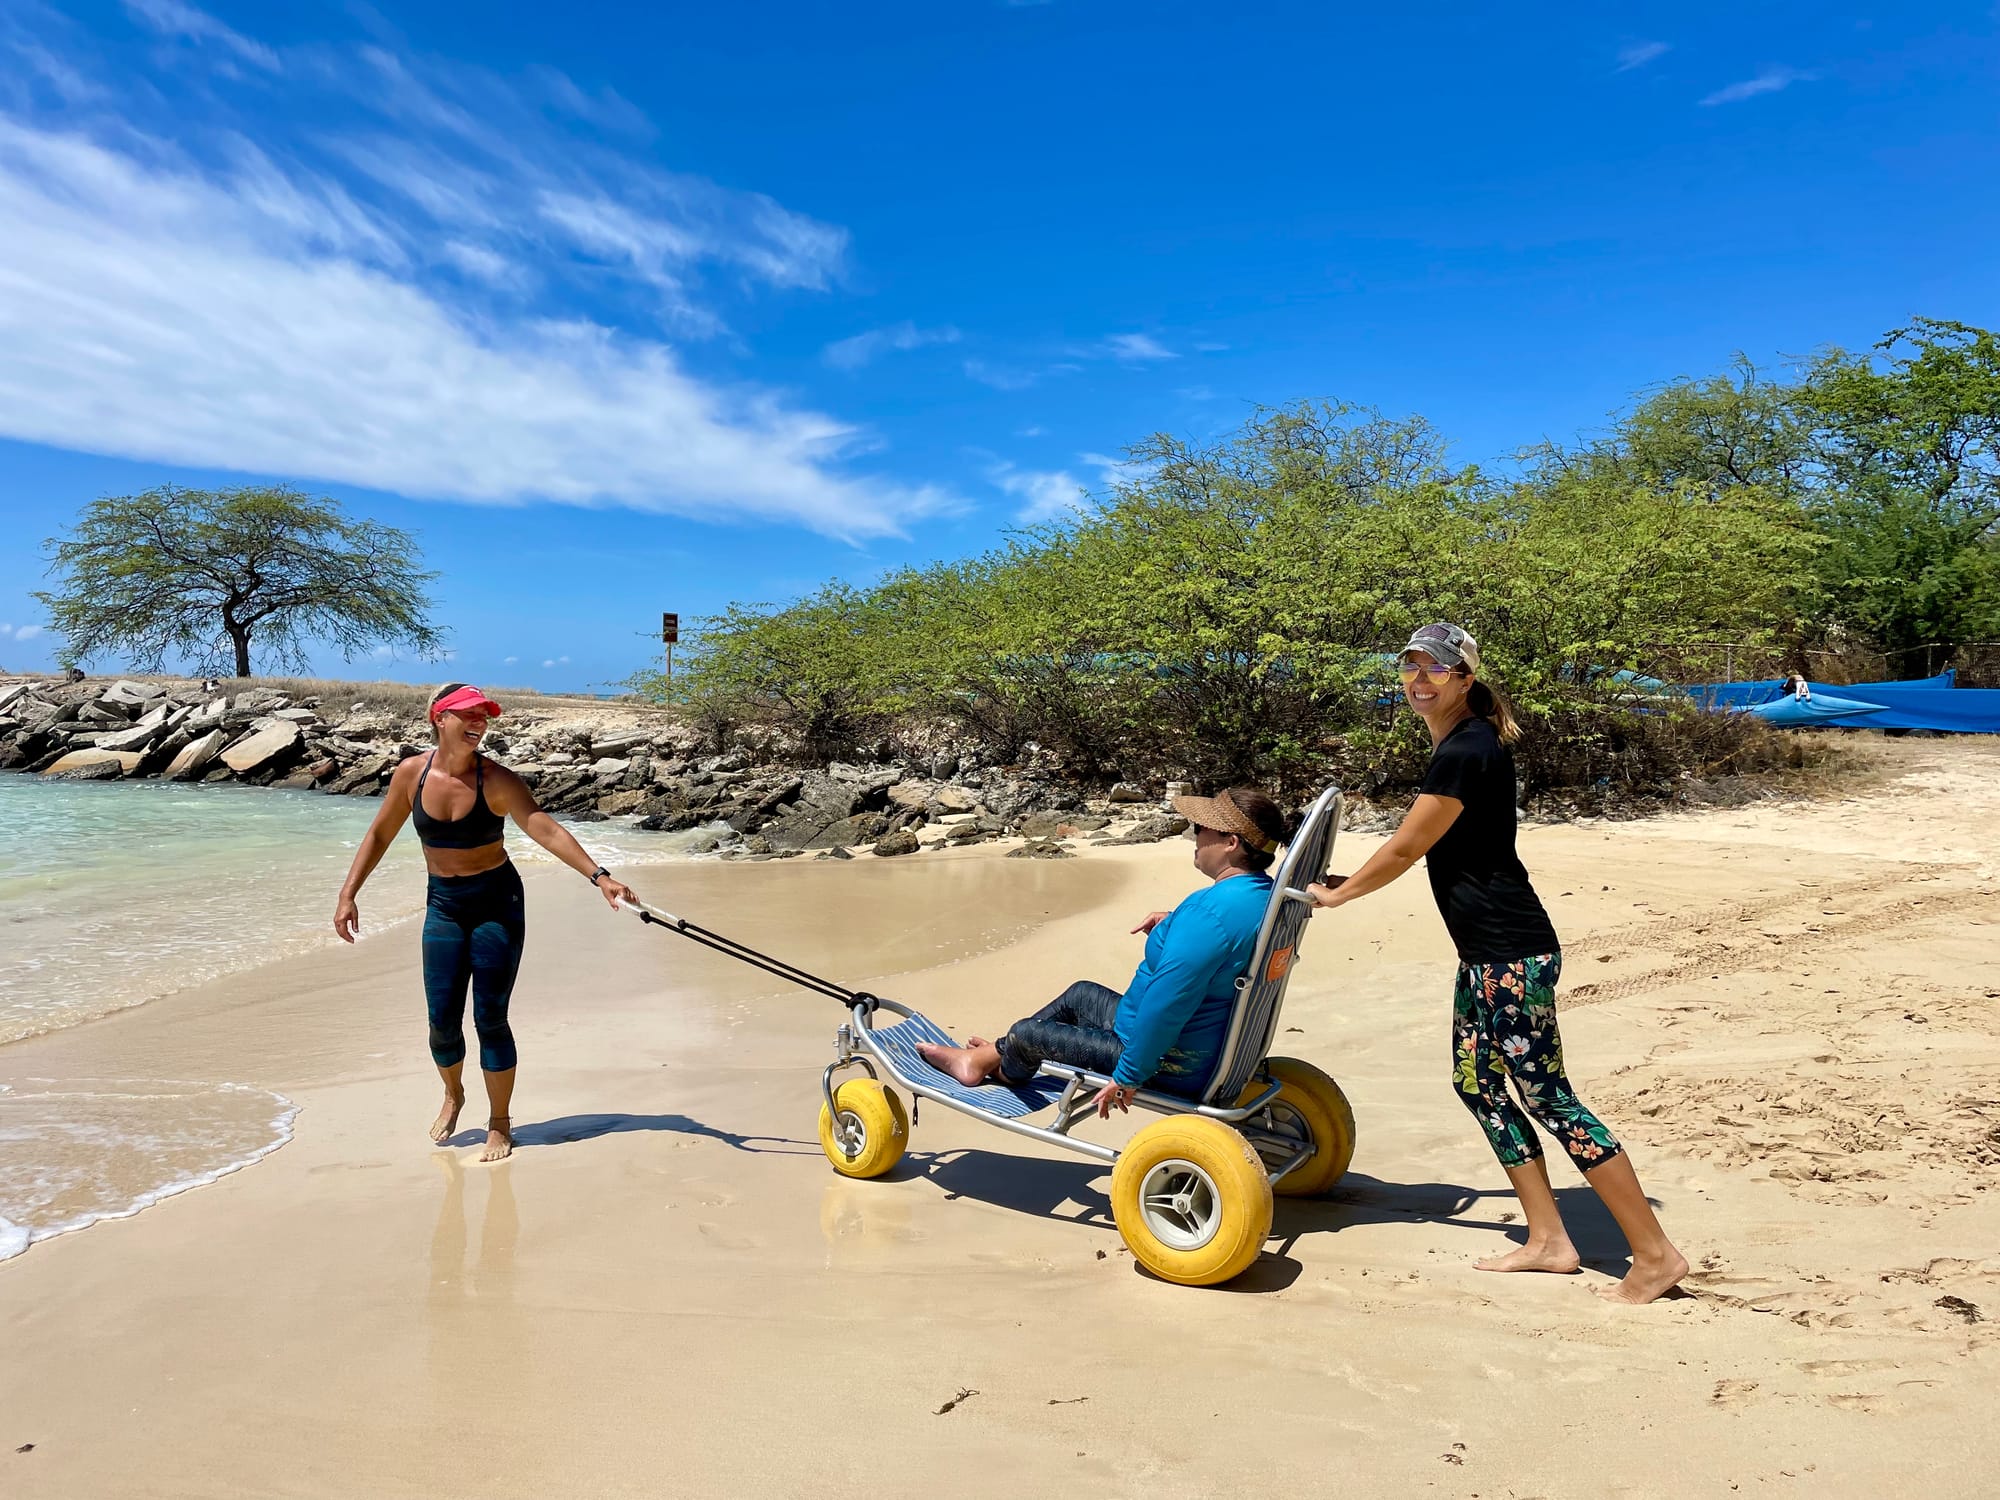 Mobi beach wheelchairs are perfect for going into the water